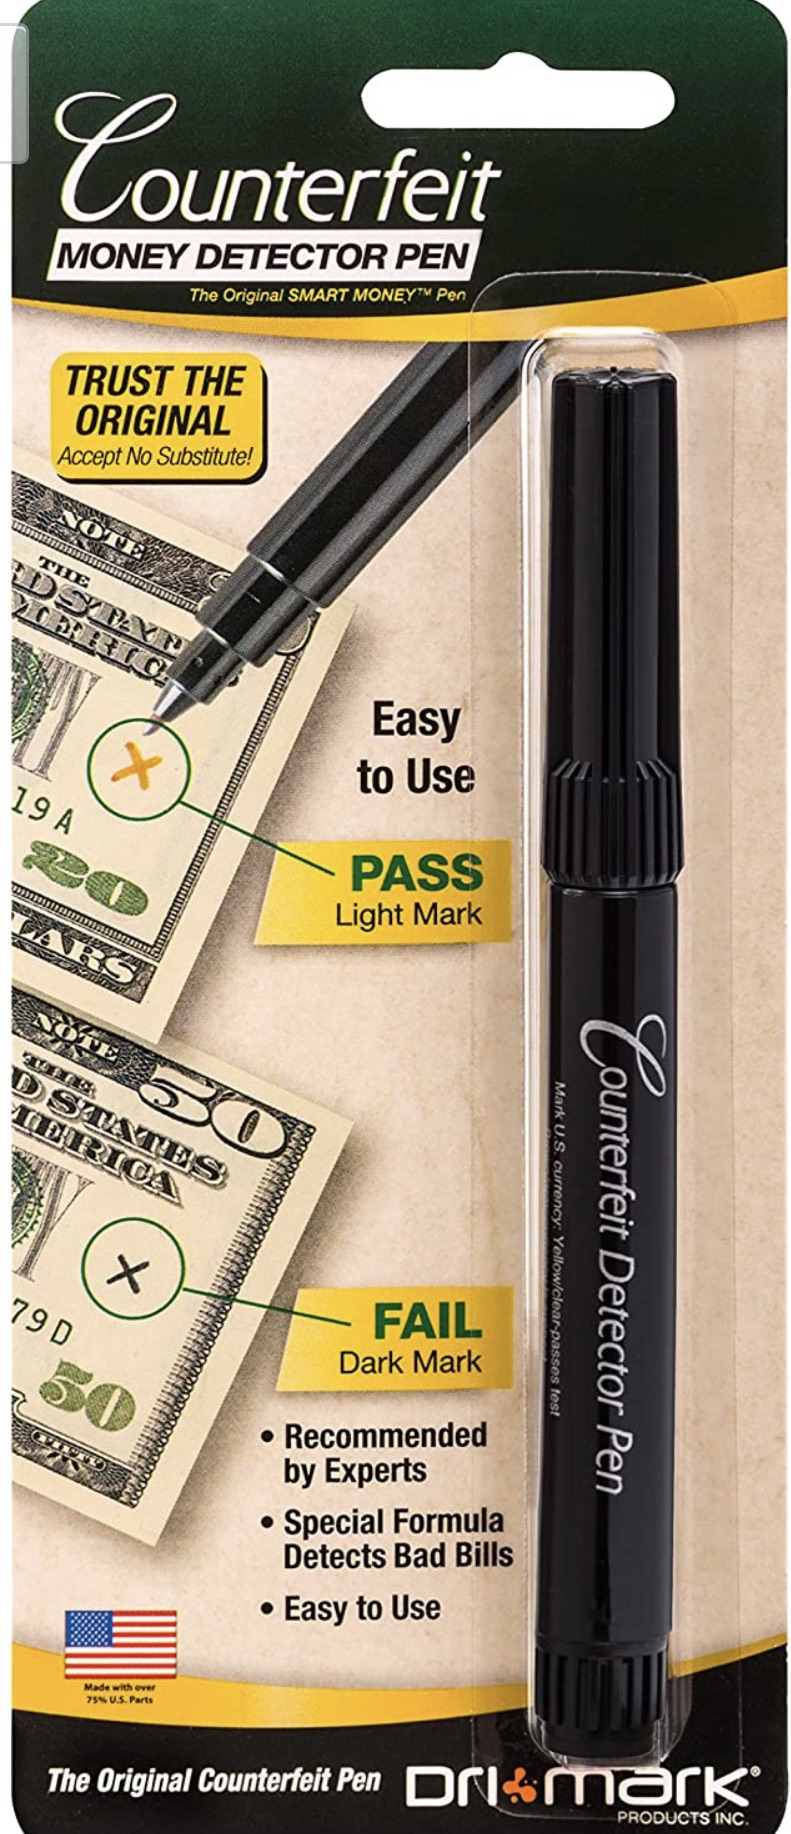 Amazon.com : Dri-Mark Counterfeit Money Detector Pen for Use with U.S. Currency : Banking And Money Handling Supplies : Office Products验钞笔